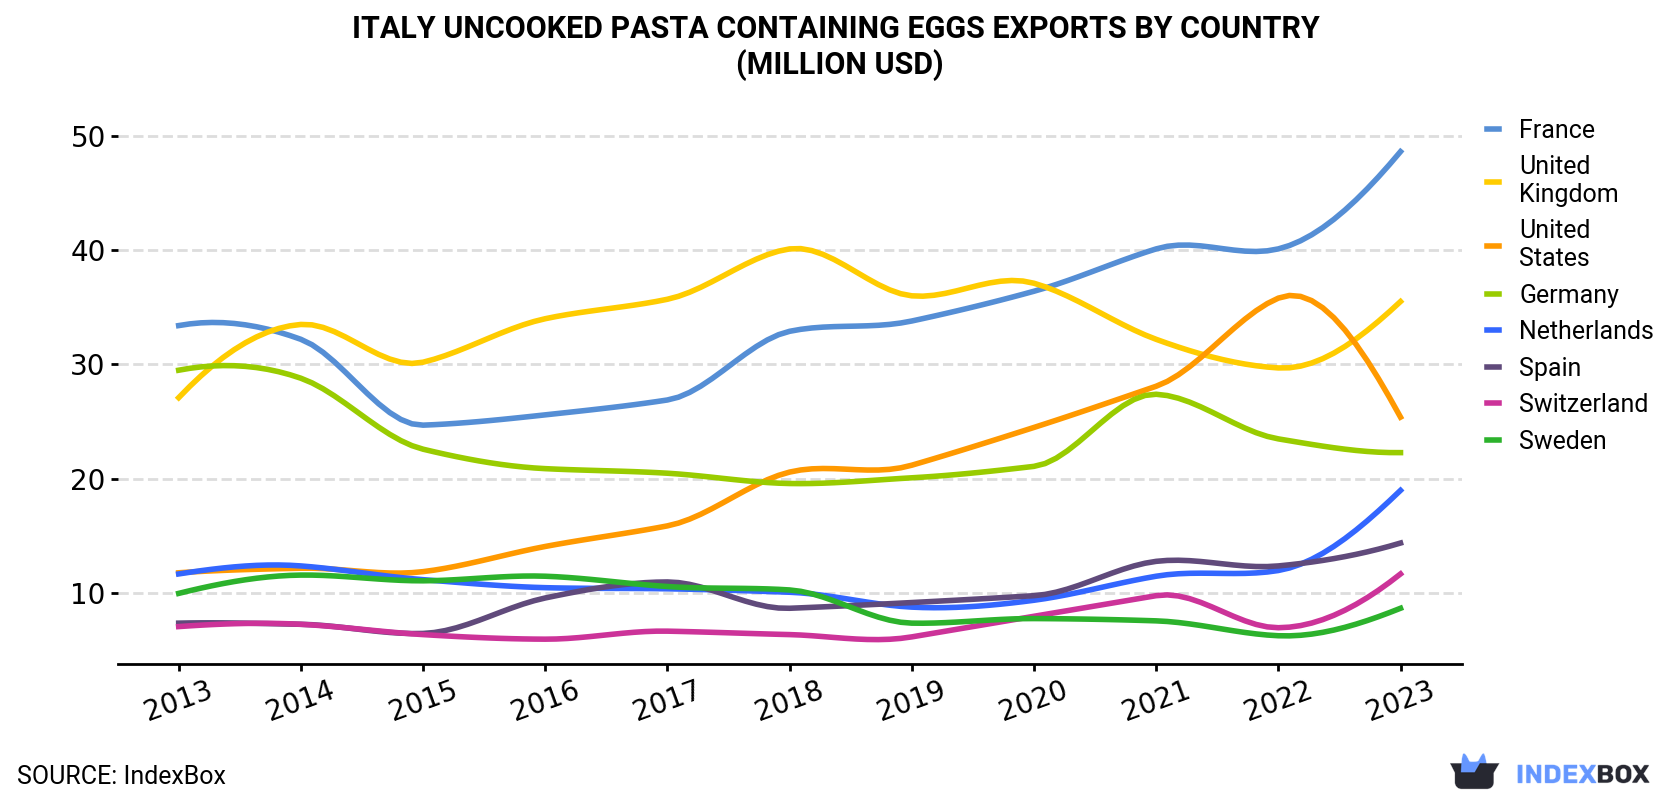 Italy Uncooked Pasta Containing Eggs Exports By Country (Million USD)